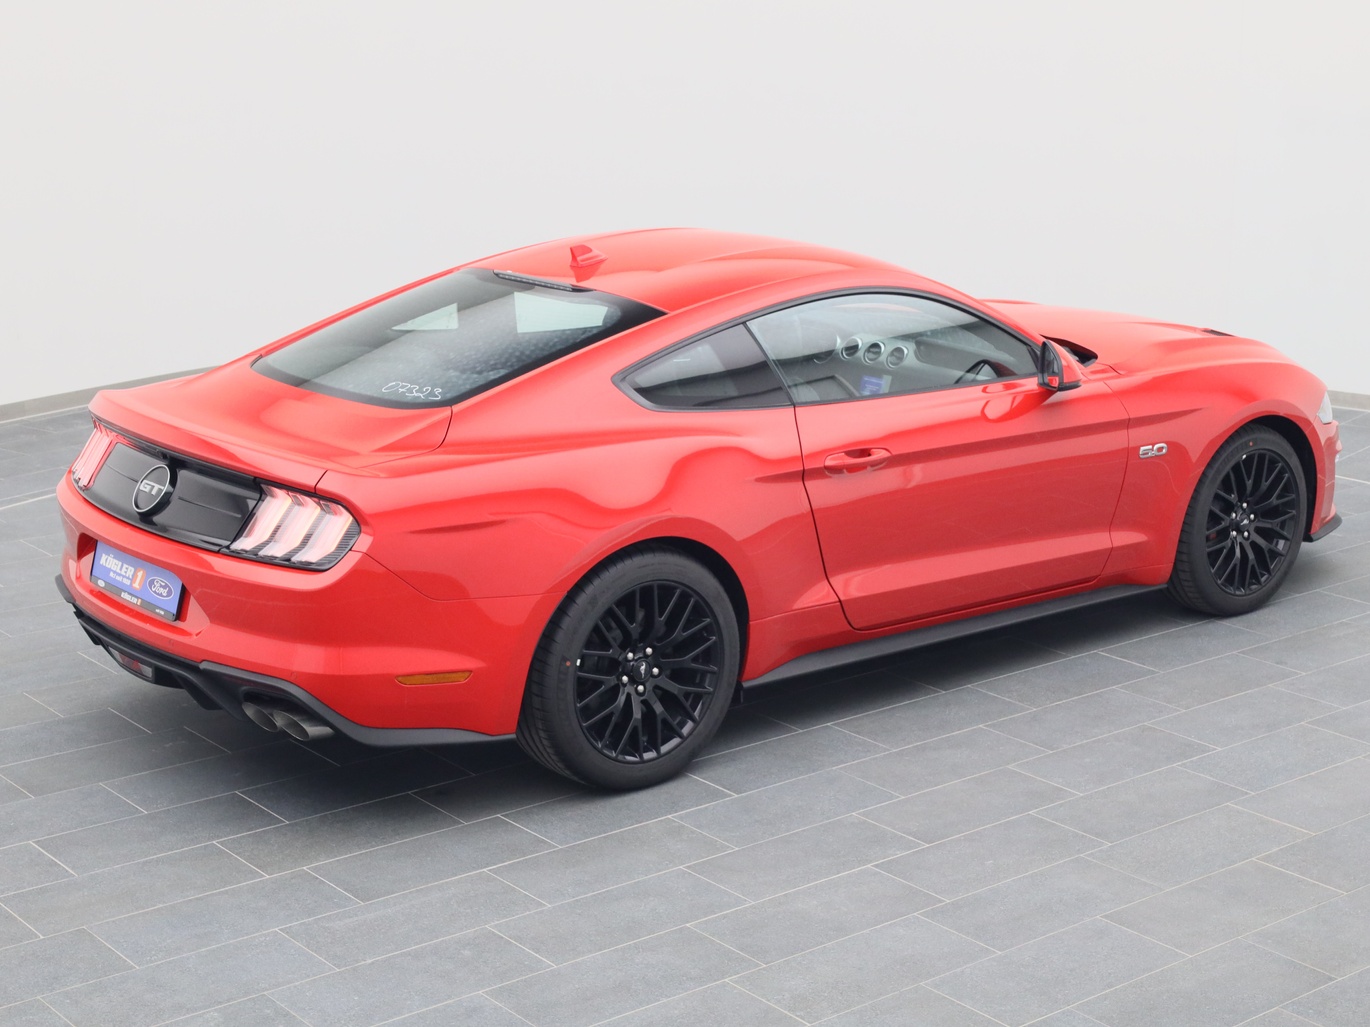  Ford Mustang GT Coupé V8 450PS Aut / Premium 2 in Race-rot 